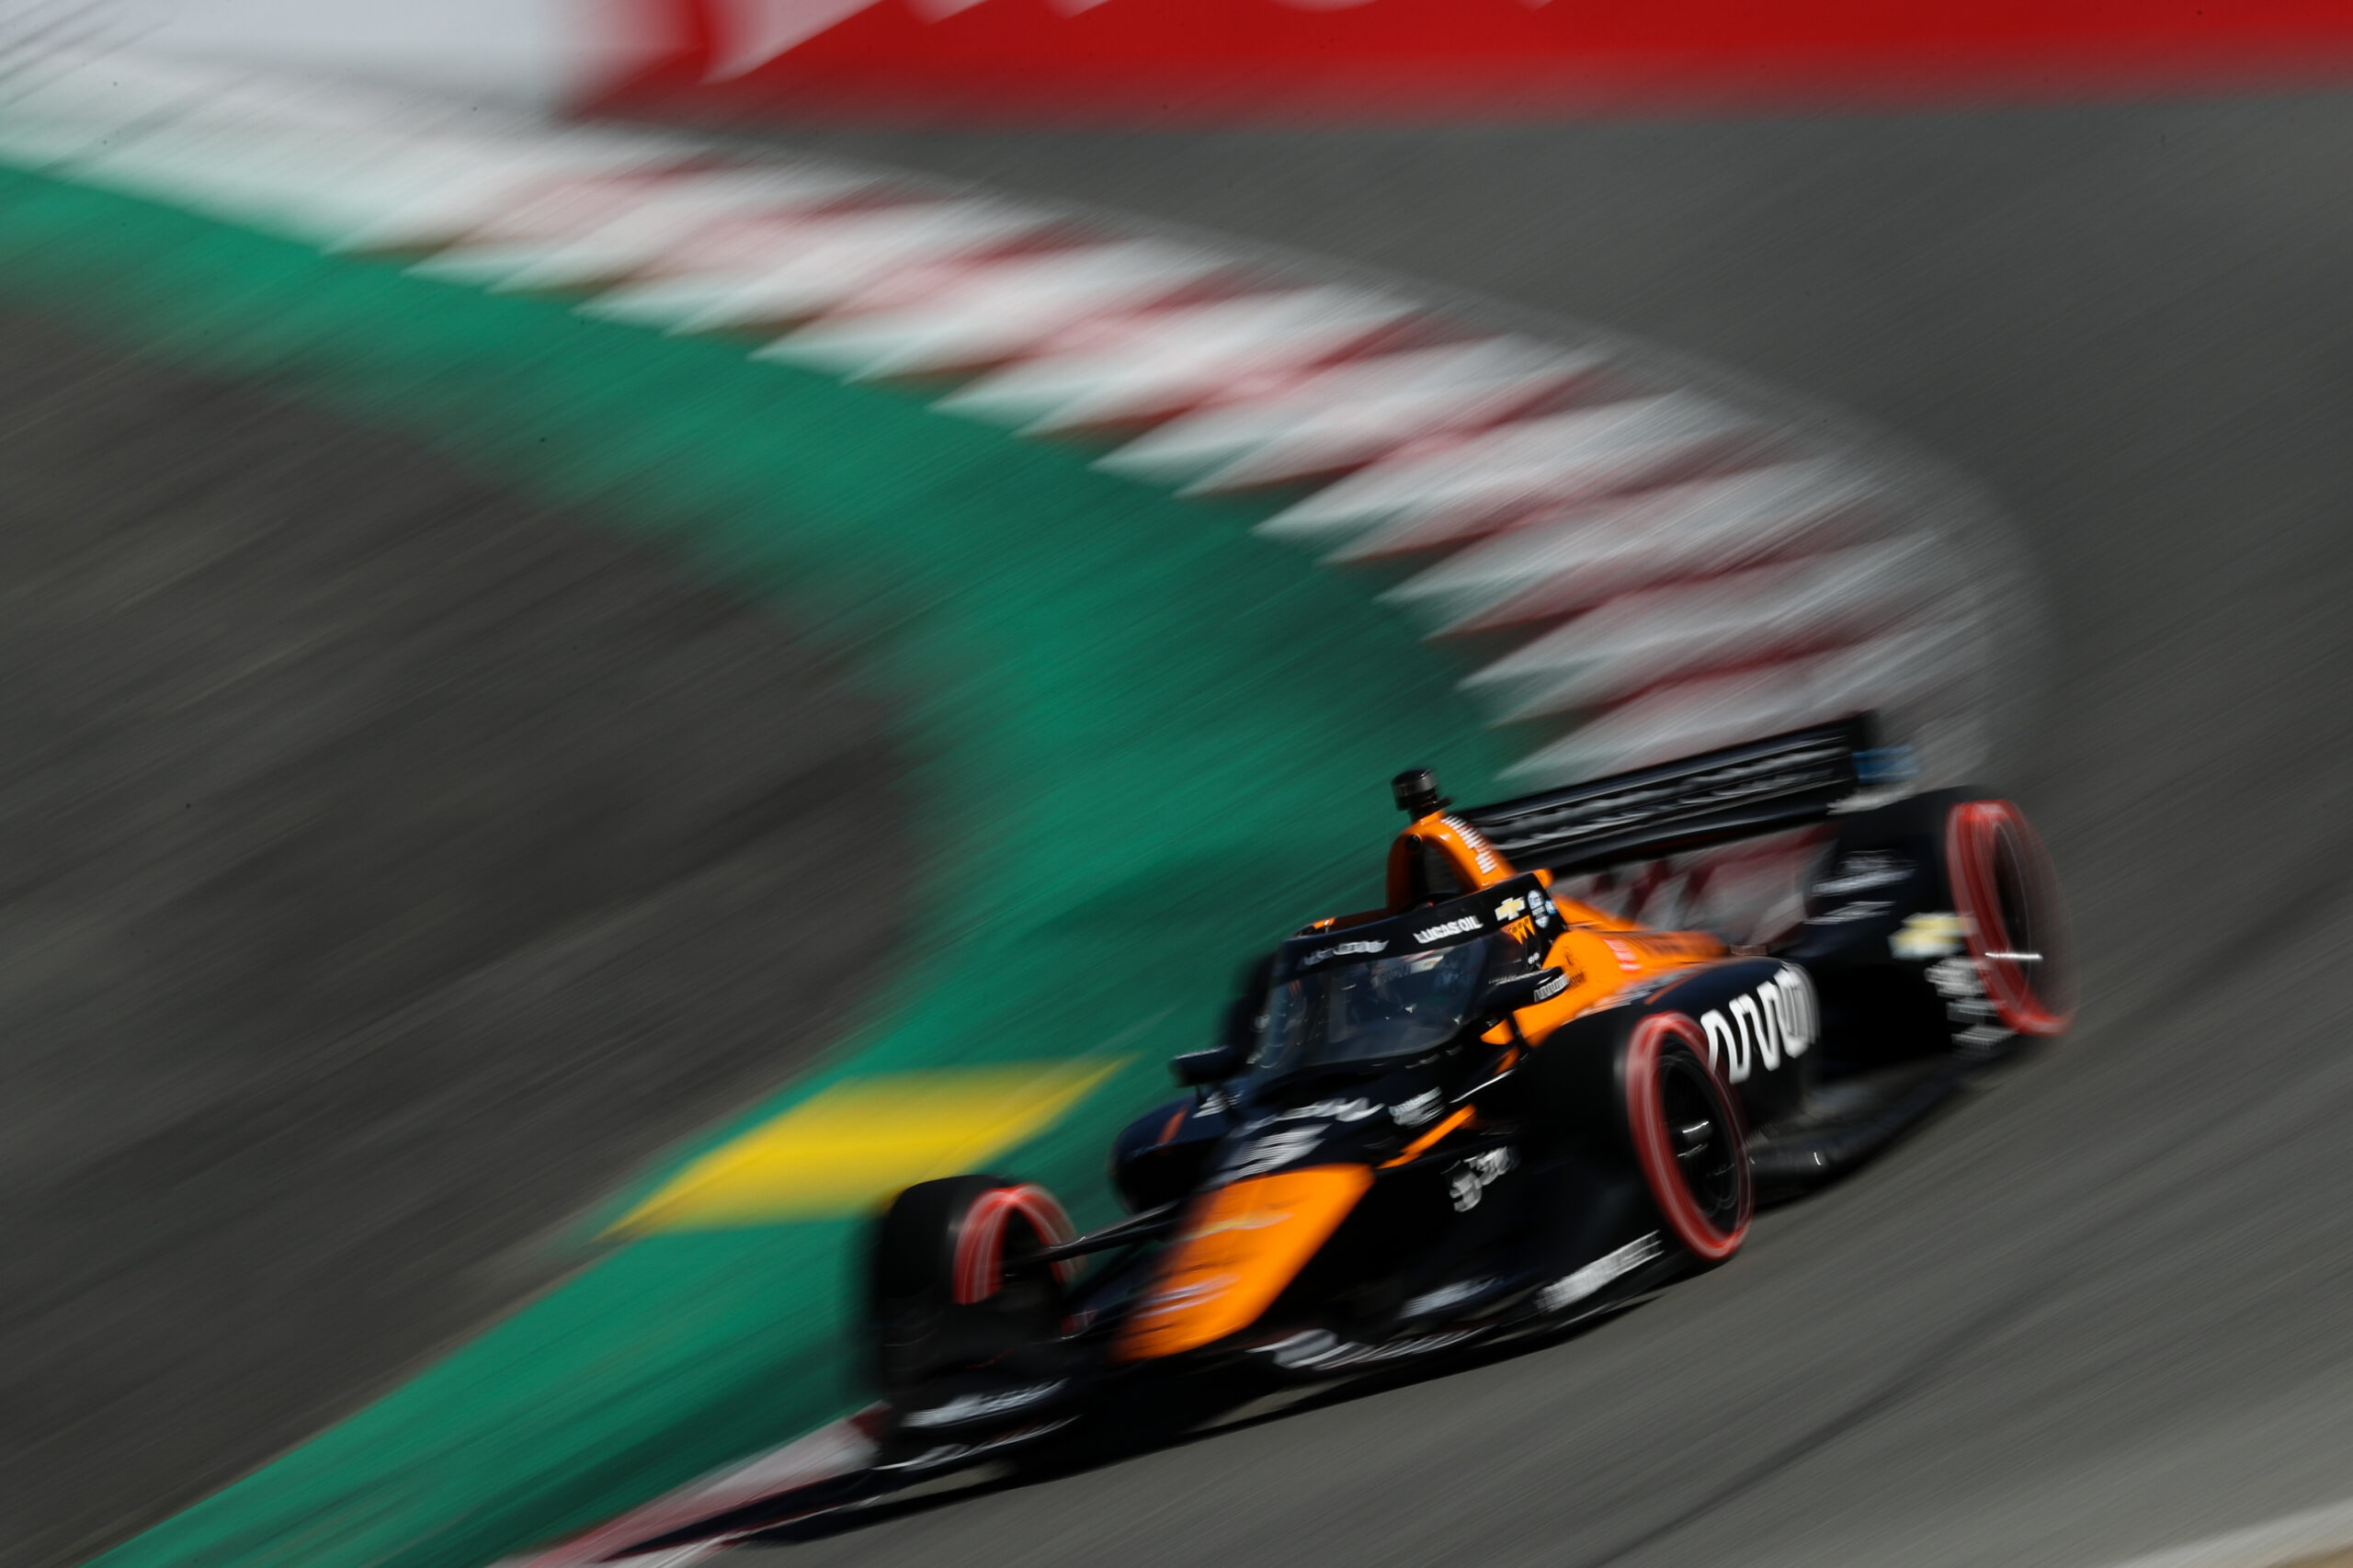 Time may be running out for Pato O'Ward with this year's championship. (Photo: Joe Skibinski | INDYCAR)